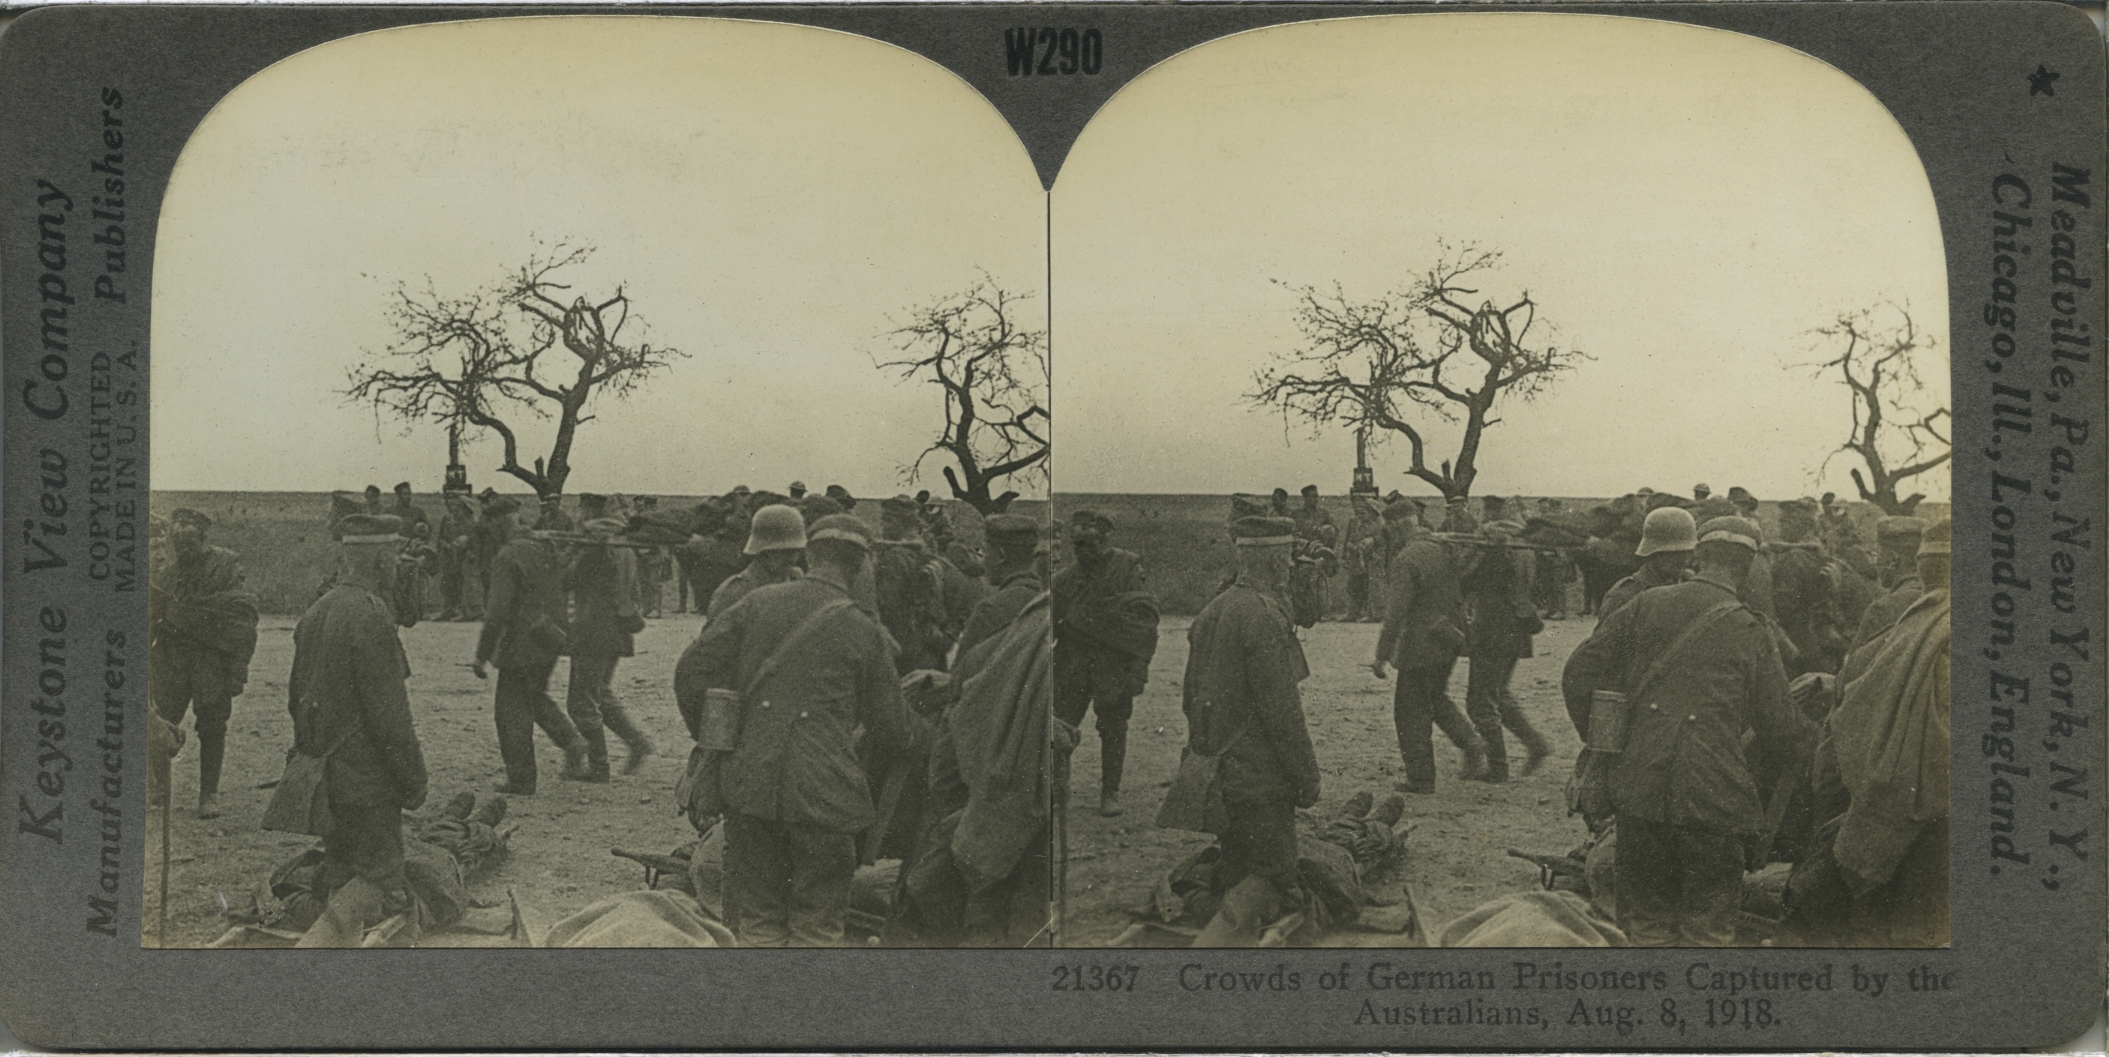 Crowds of German Prisoners Captured by the Australians, Aug. 8, 1918